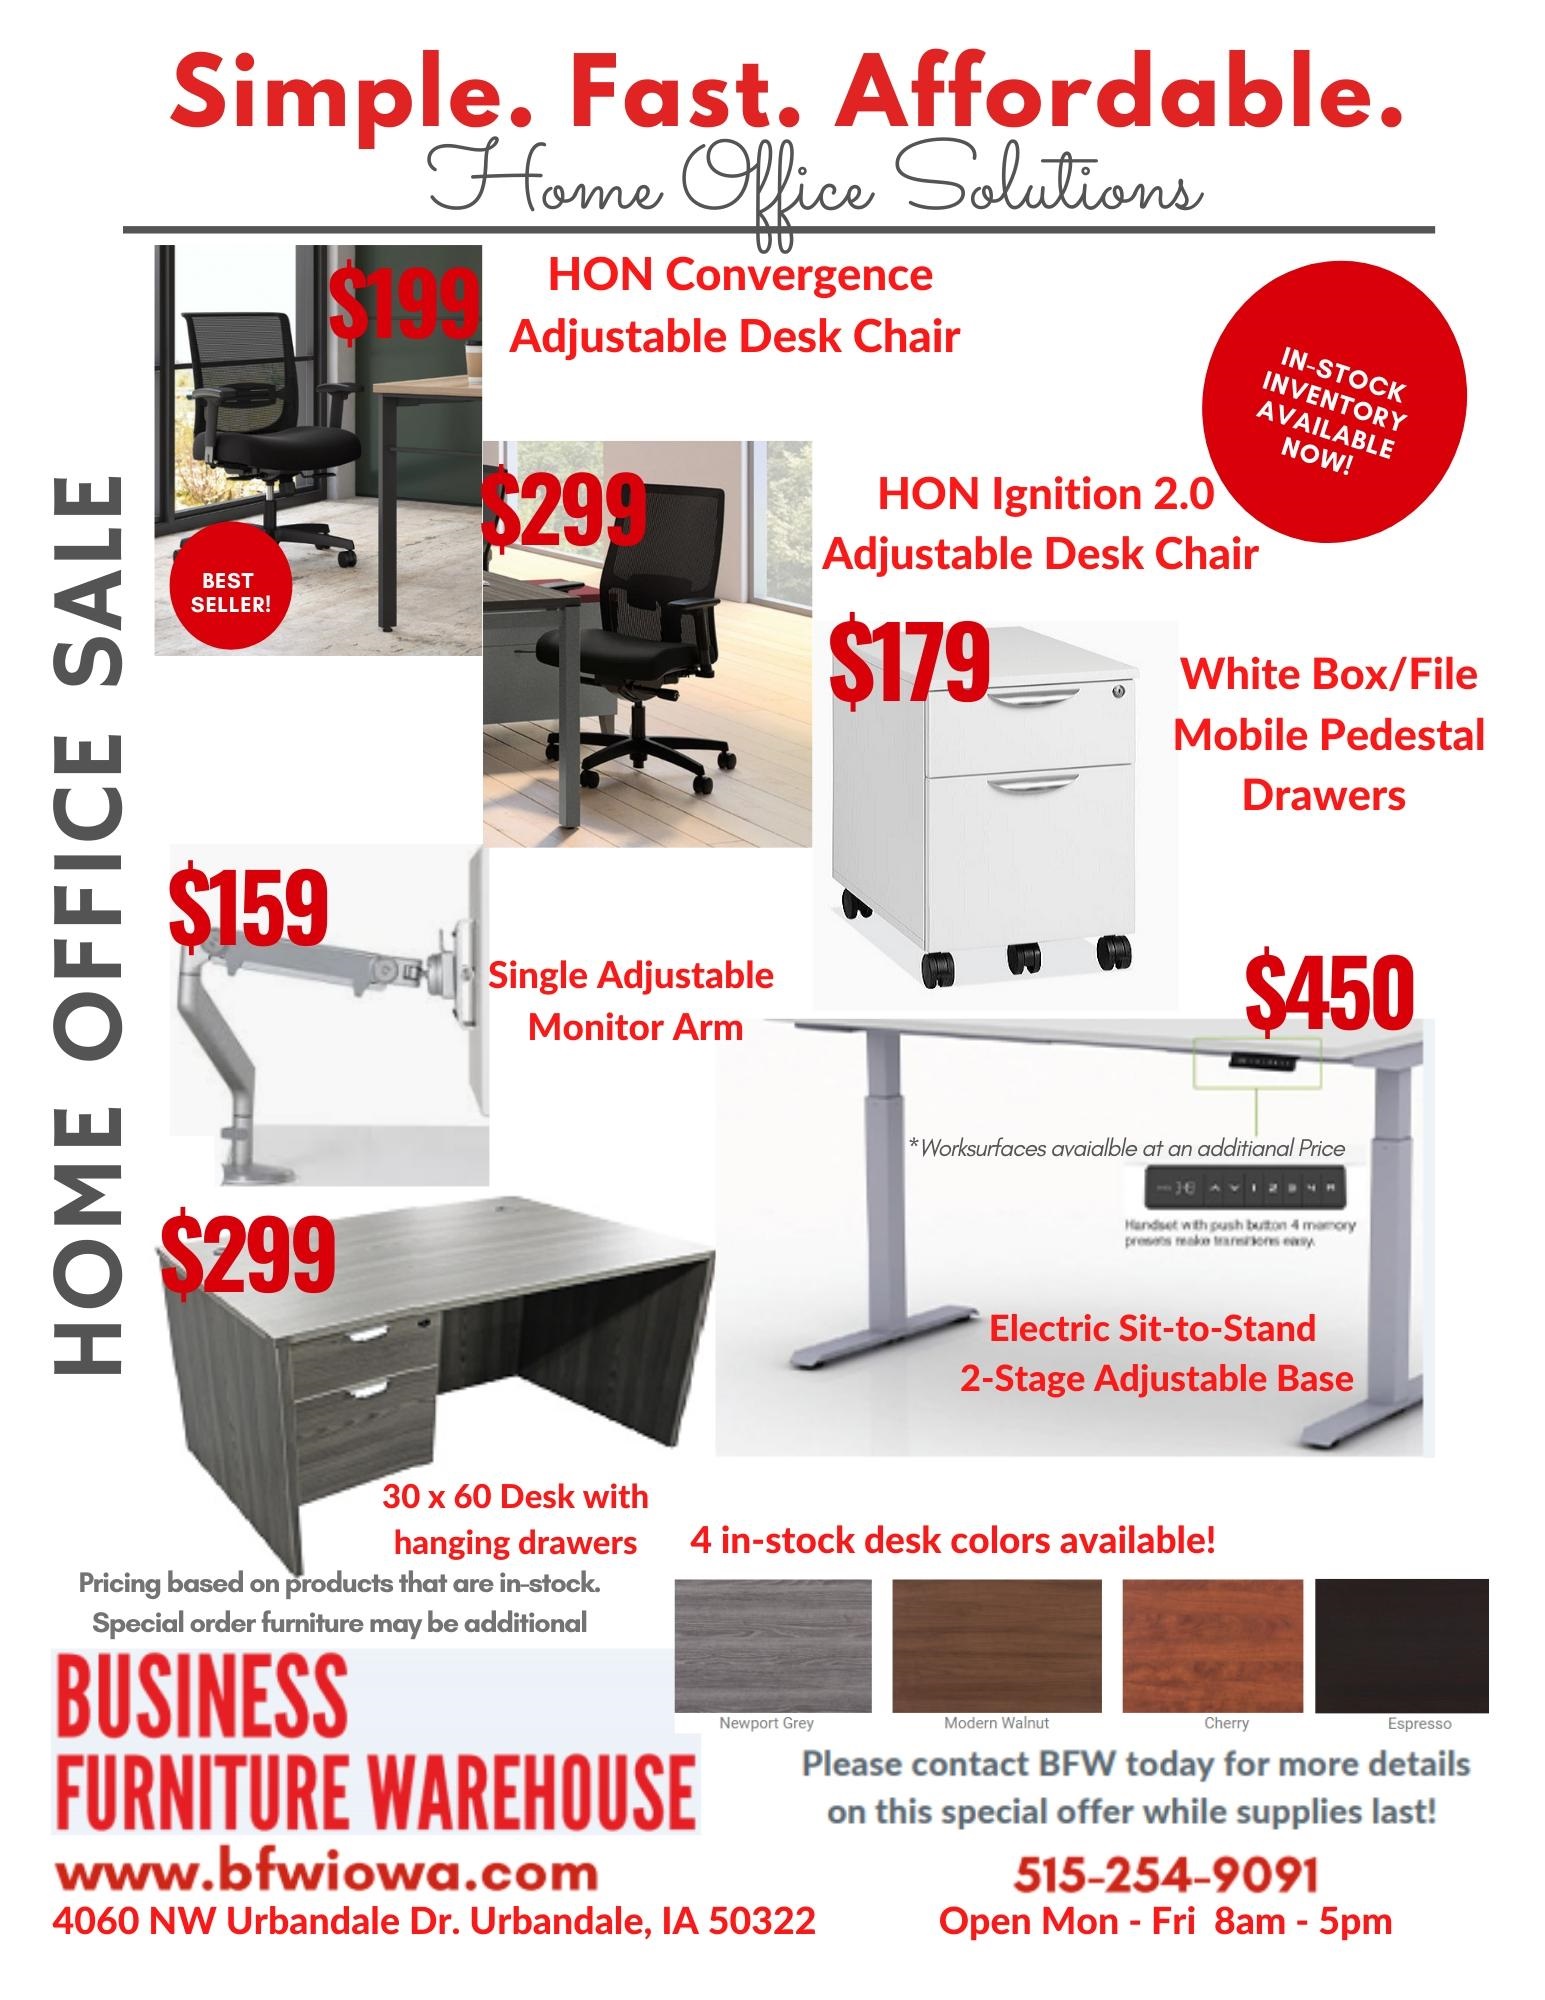 Business Furniture Warehouse Business Furniture Warehouse Home Page